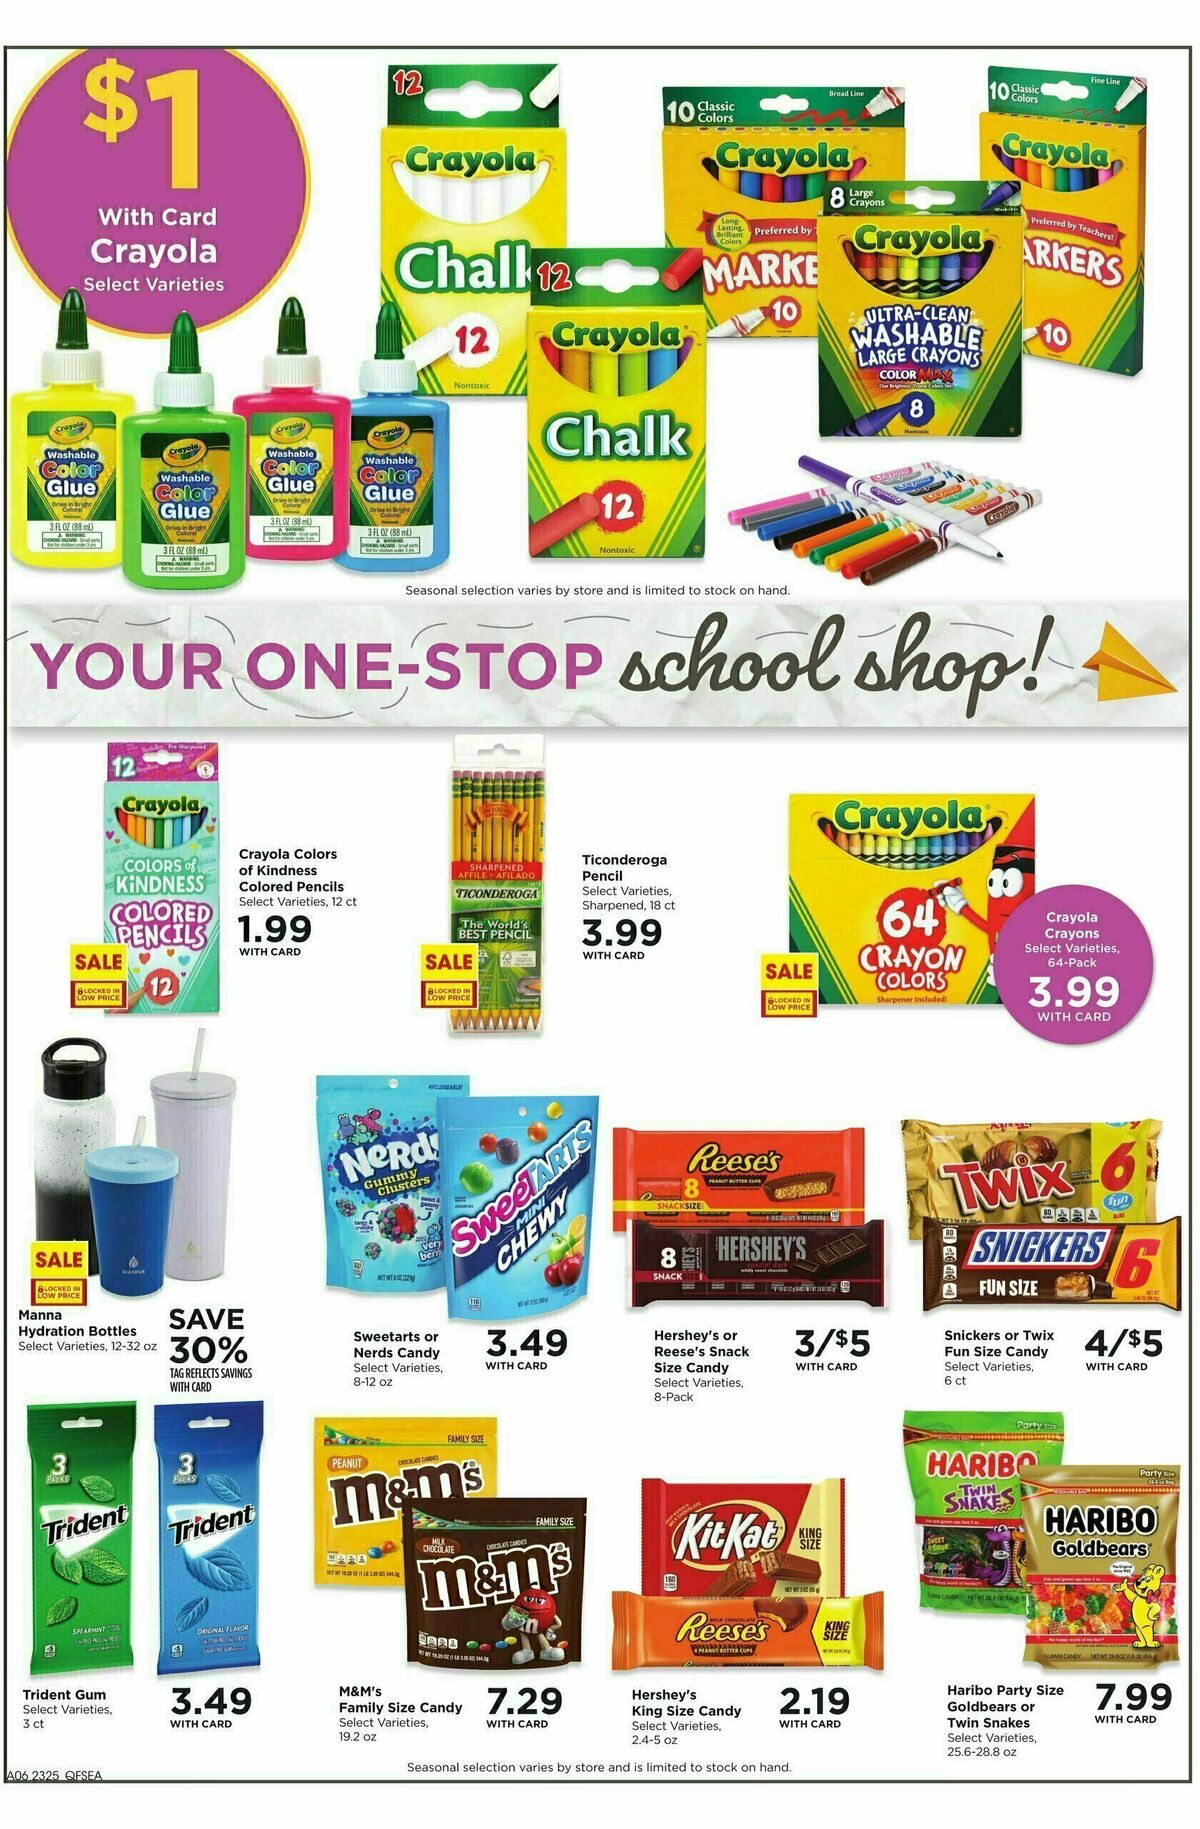 QFC Weekly Ad from July 19